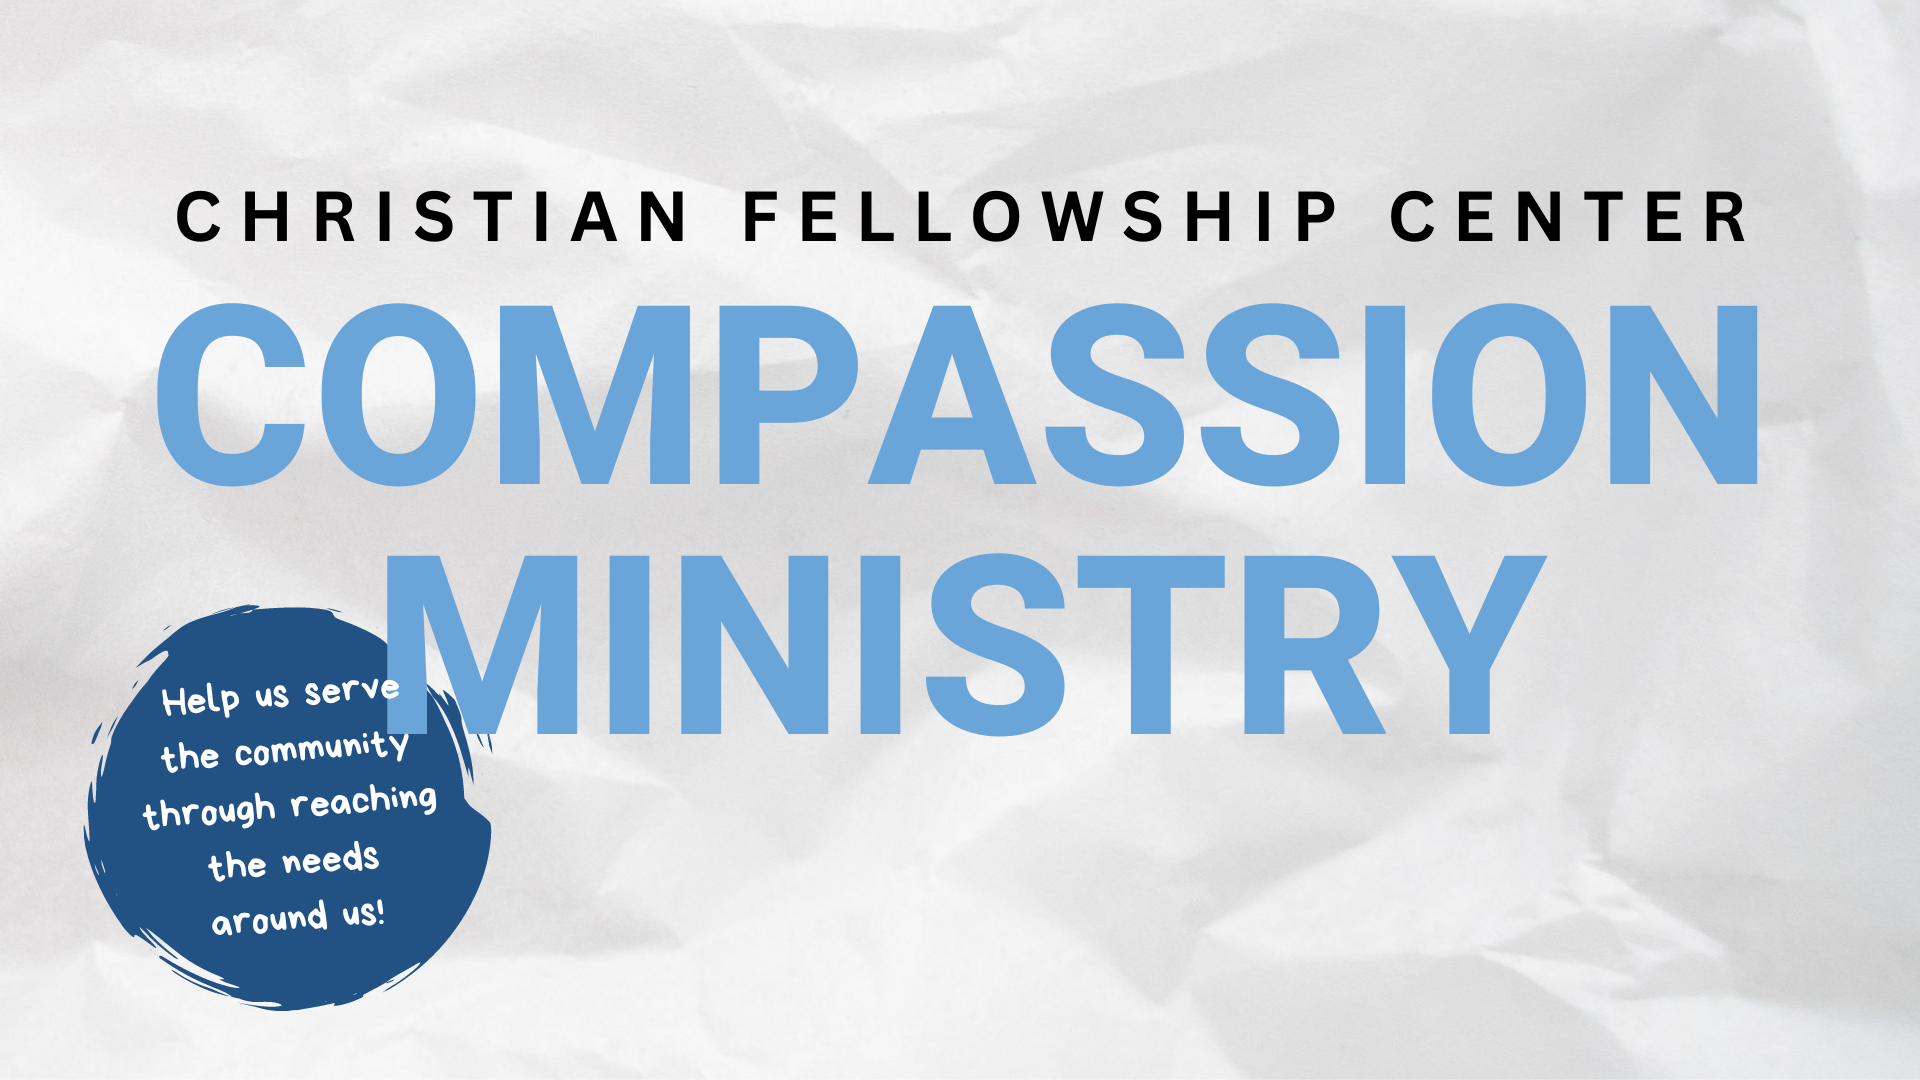 COMPASSION MINISTRY image